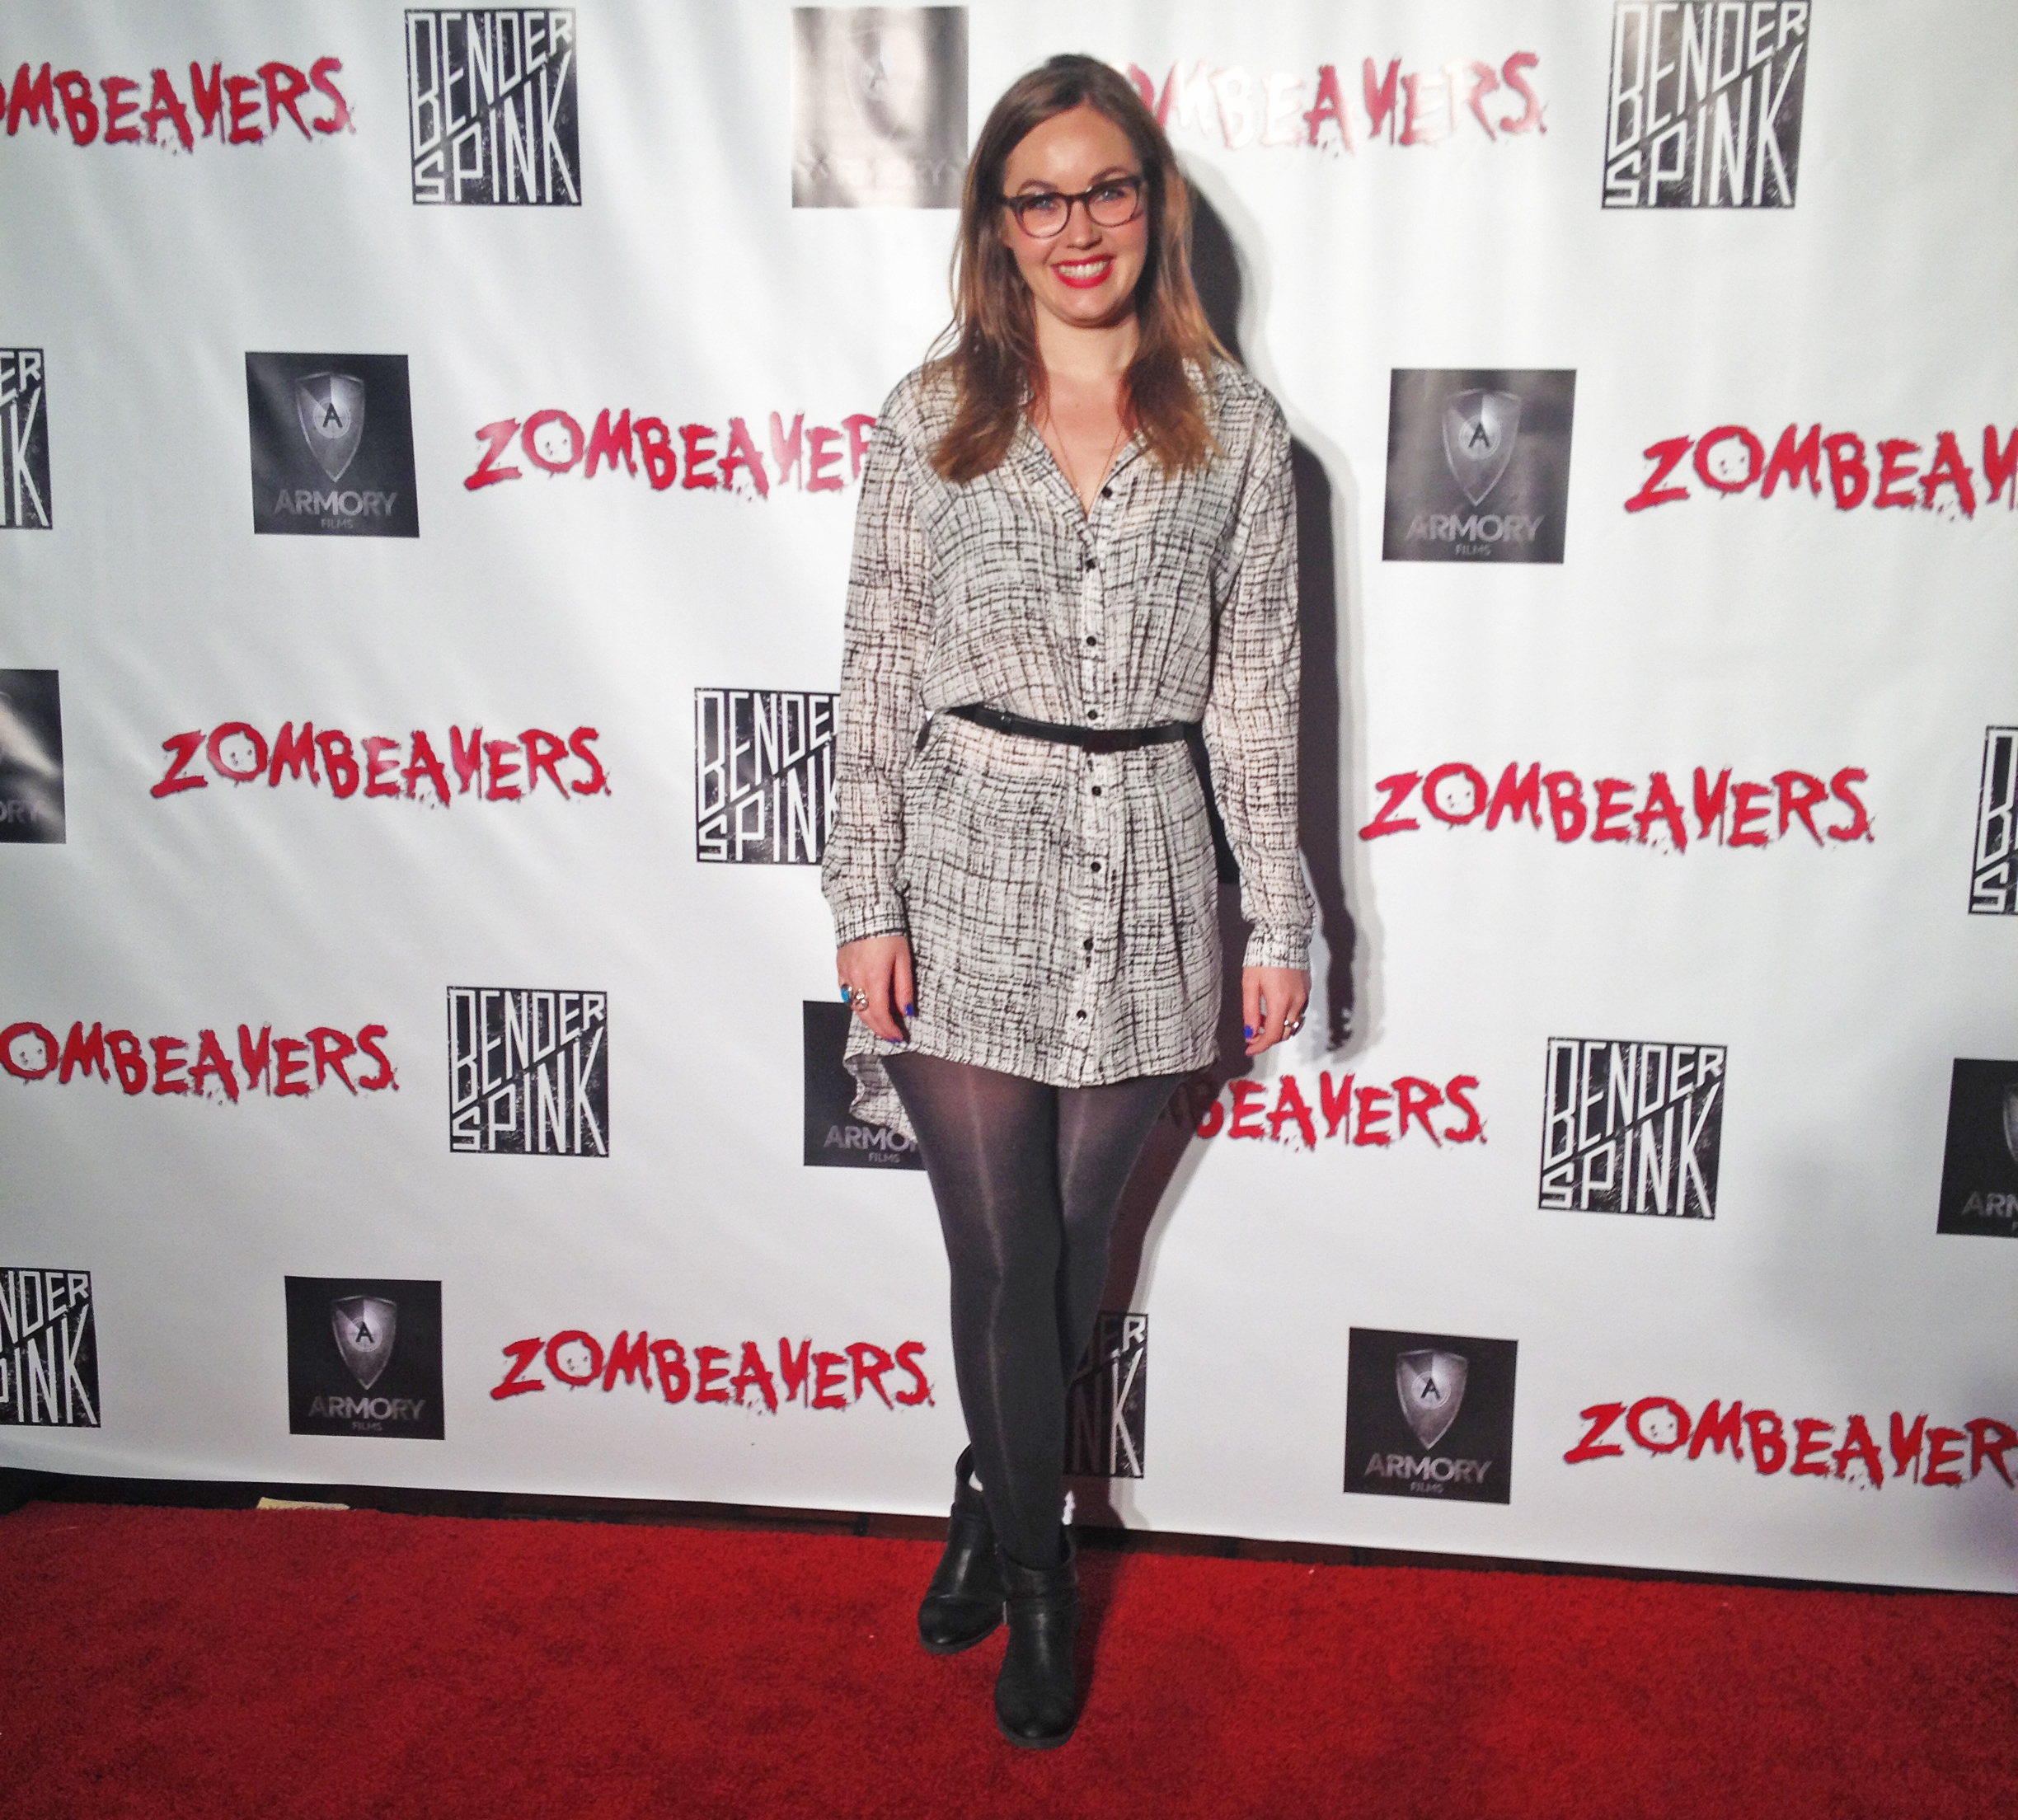 Lindsay Haalmeyer Mouat at the premiere of 